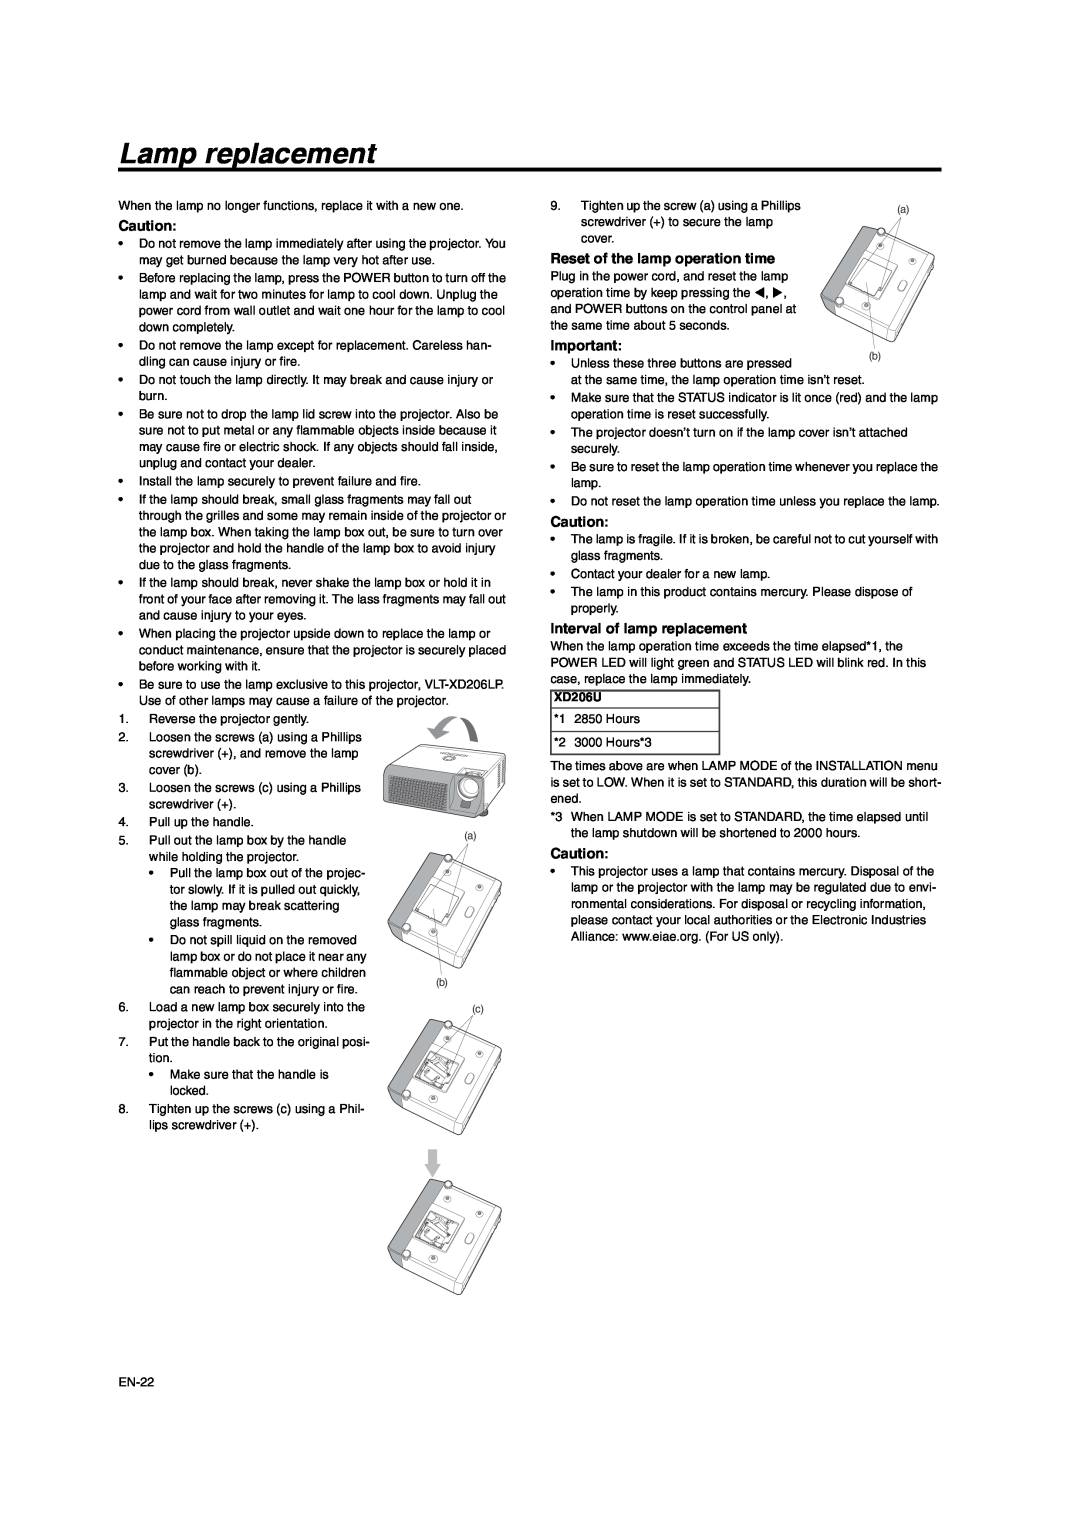 Mitsumi electronic XD206U user manual Lamp replacement, Reset of the lamp operation time, Interval of lamp replacement 